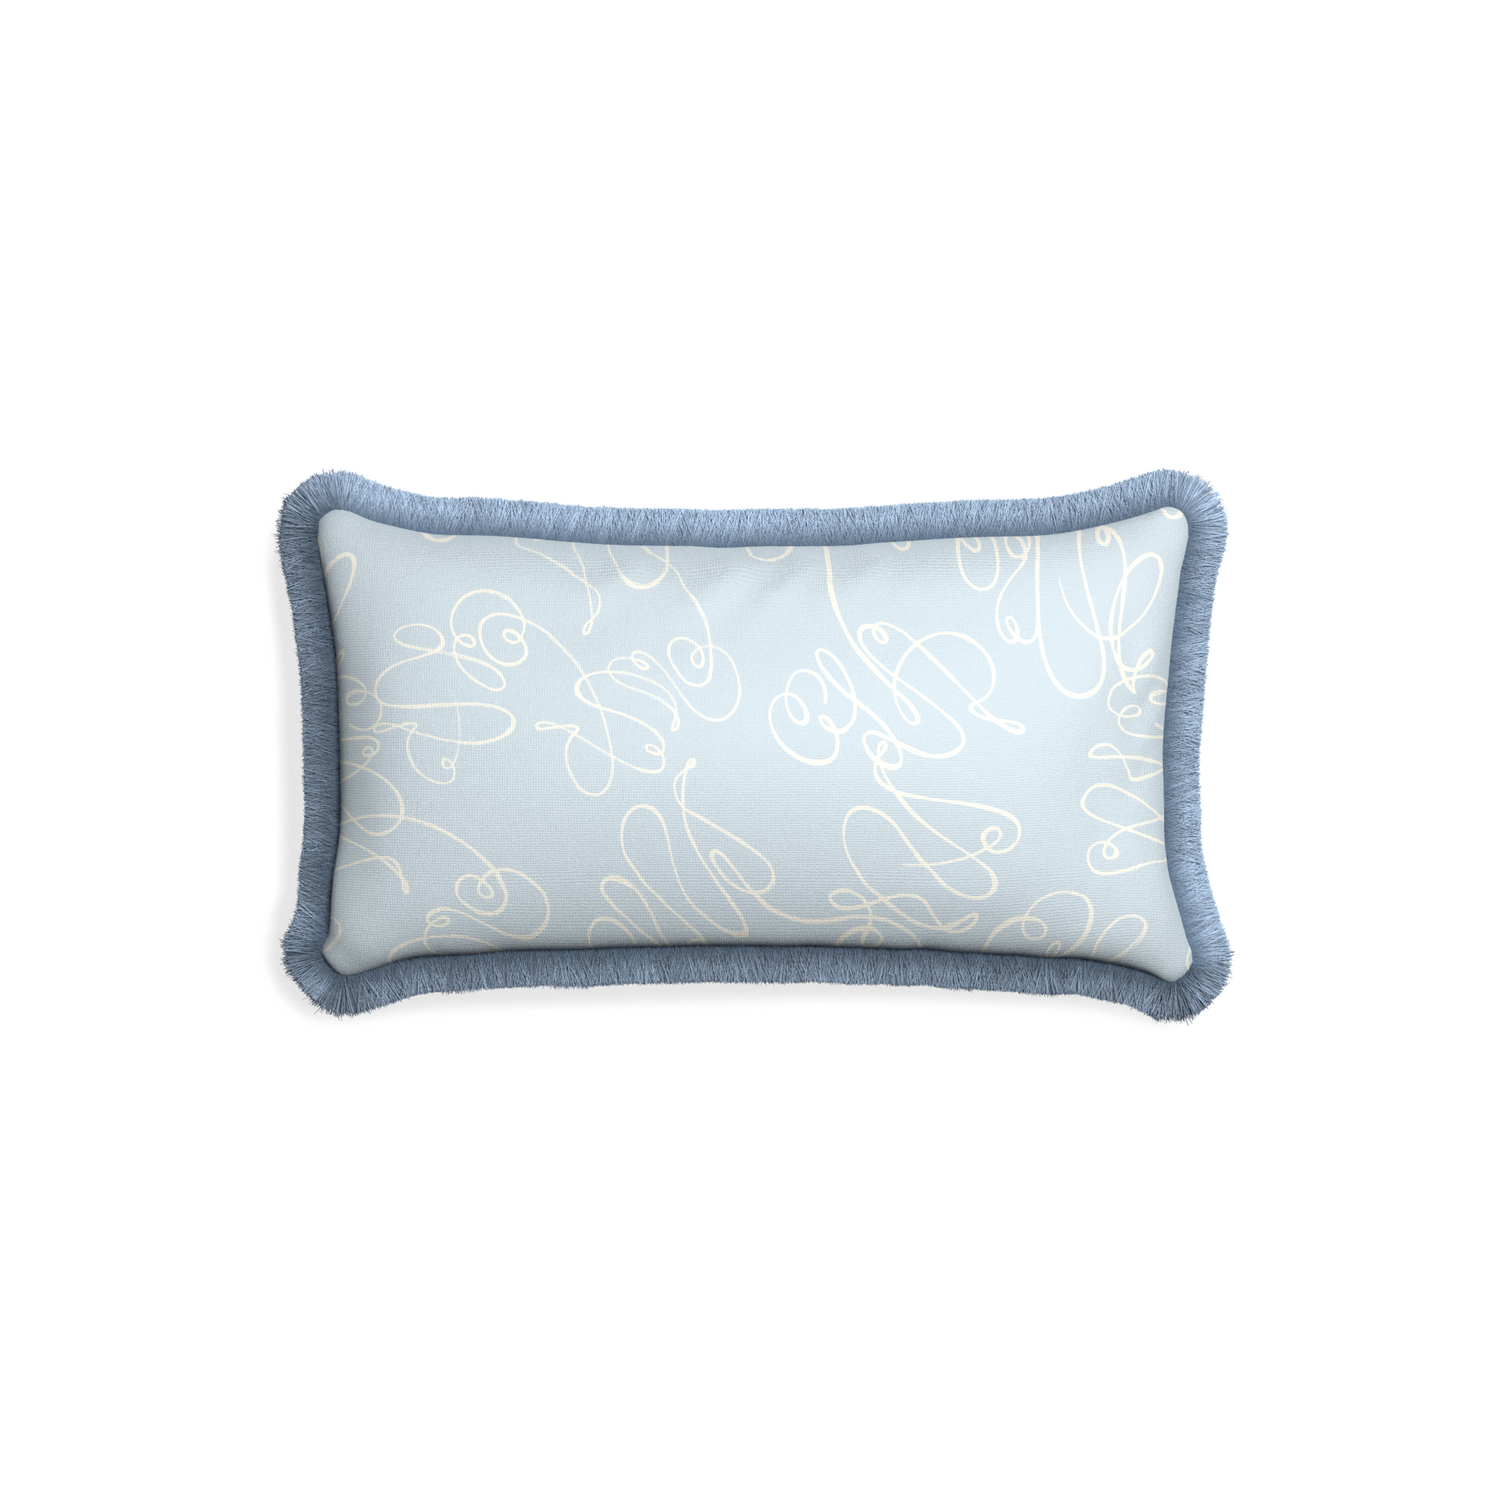 Petite-lumbar mirabella custom powder blue abstractpillow with sky fringe on white background